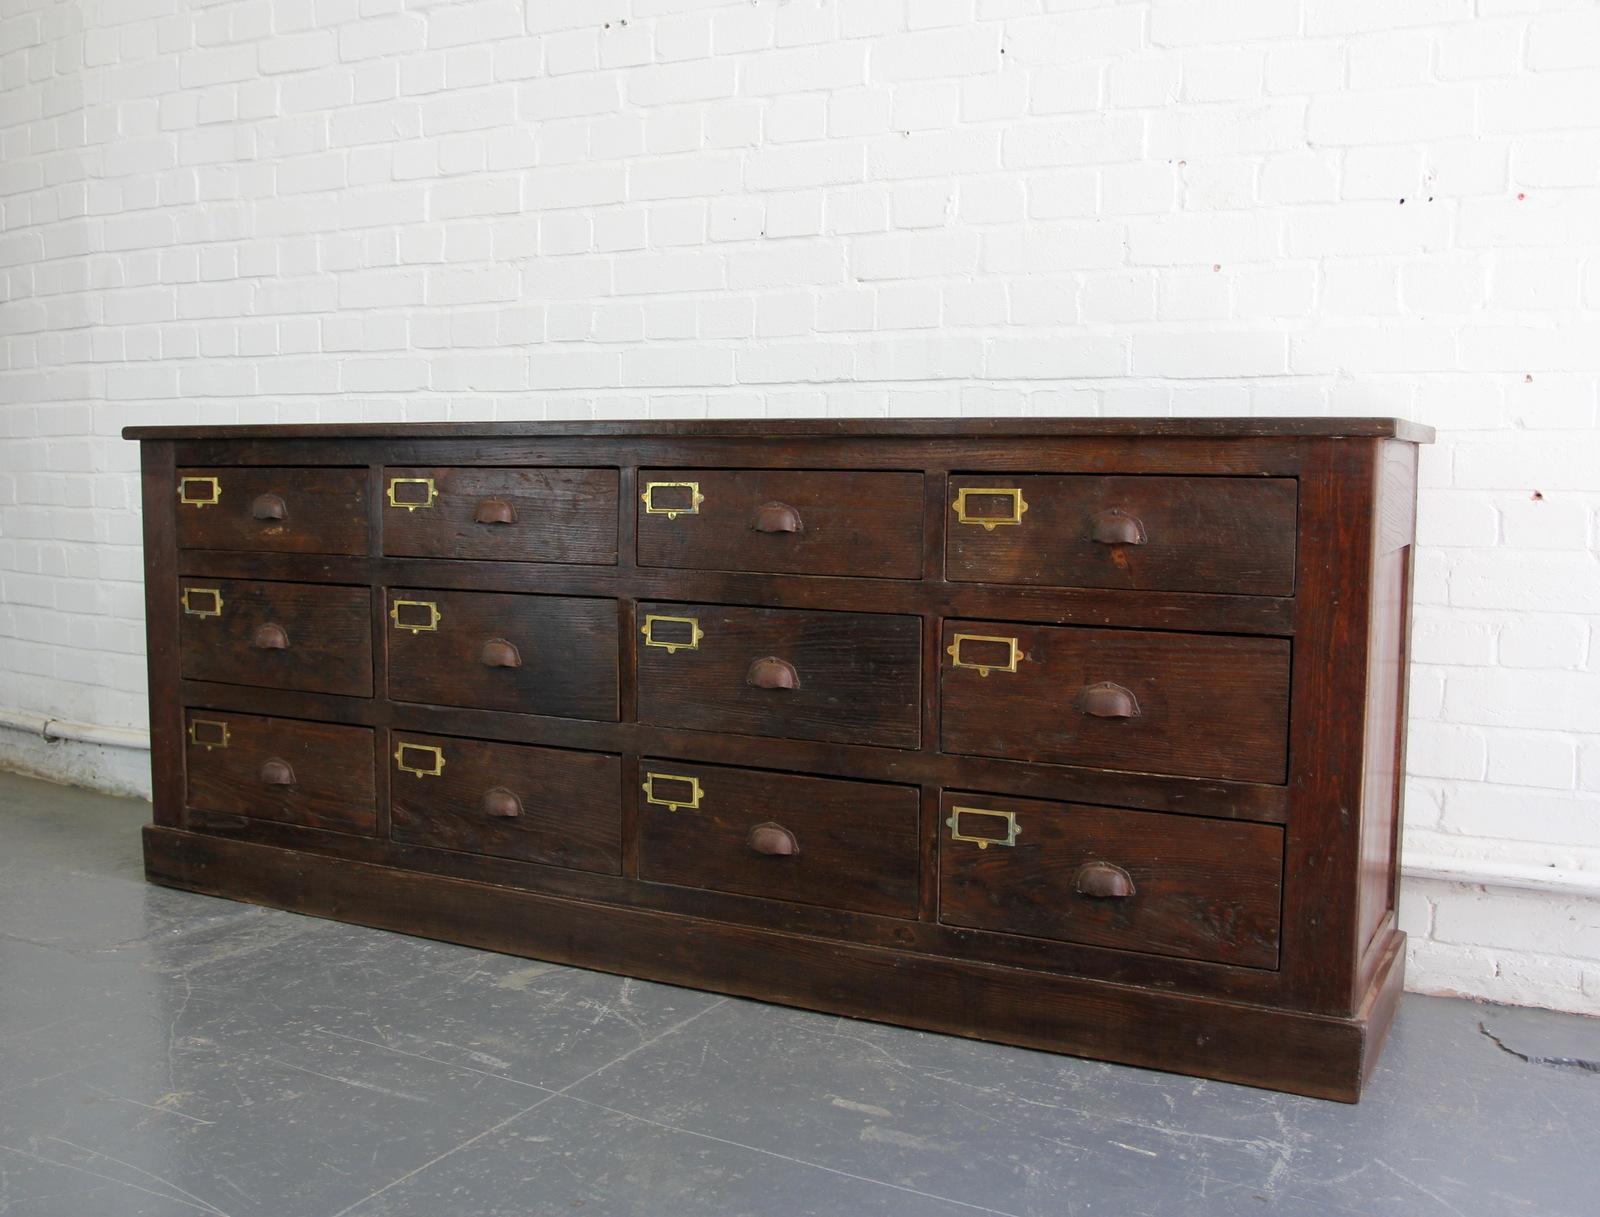 Early 20th century oak workshop drawers, circa 1900

- Sold Oak top, sides, back and drawers
- Original cast steel handles
- Brass card holders
- French, circa 1900
- 207cm long x 44cm deep x 80cm tall

Condition report:

The unit has been